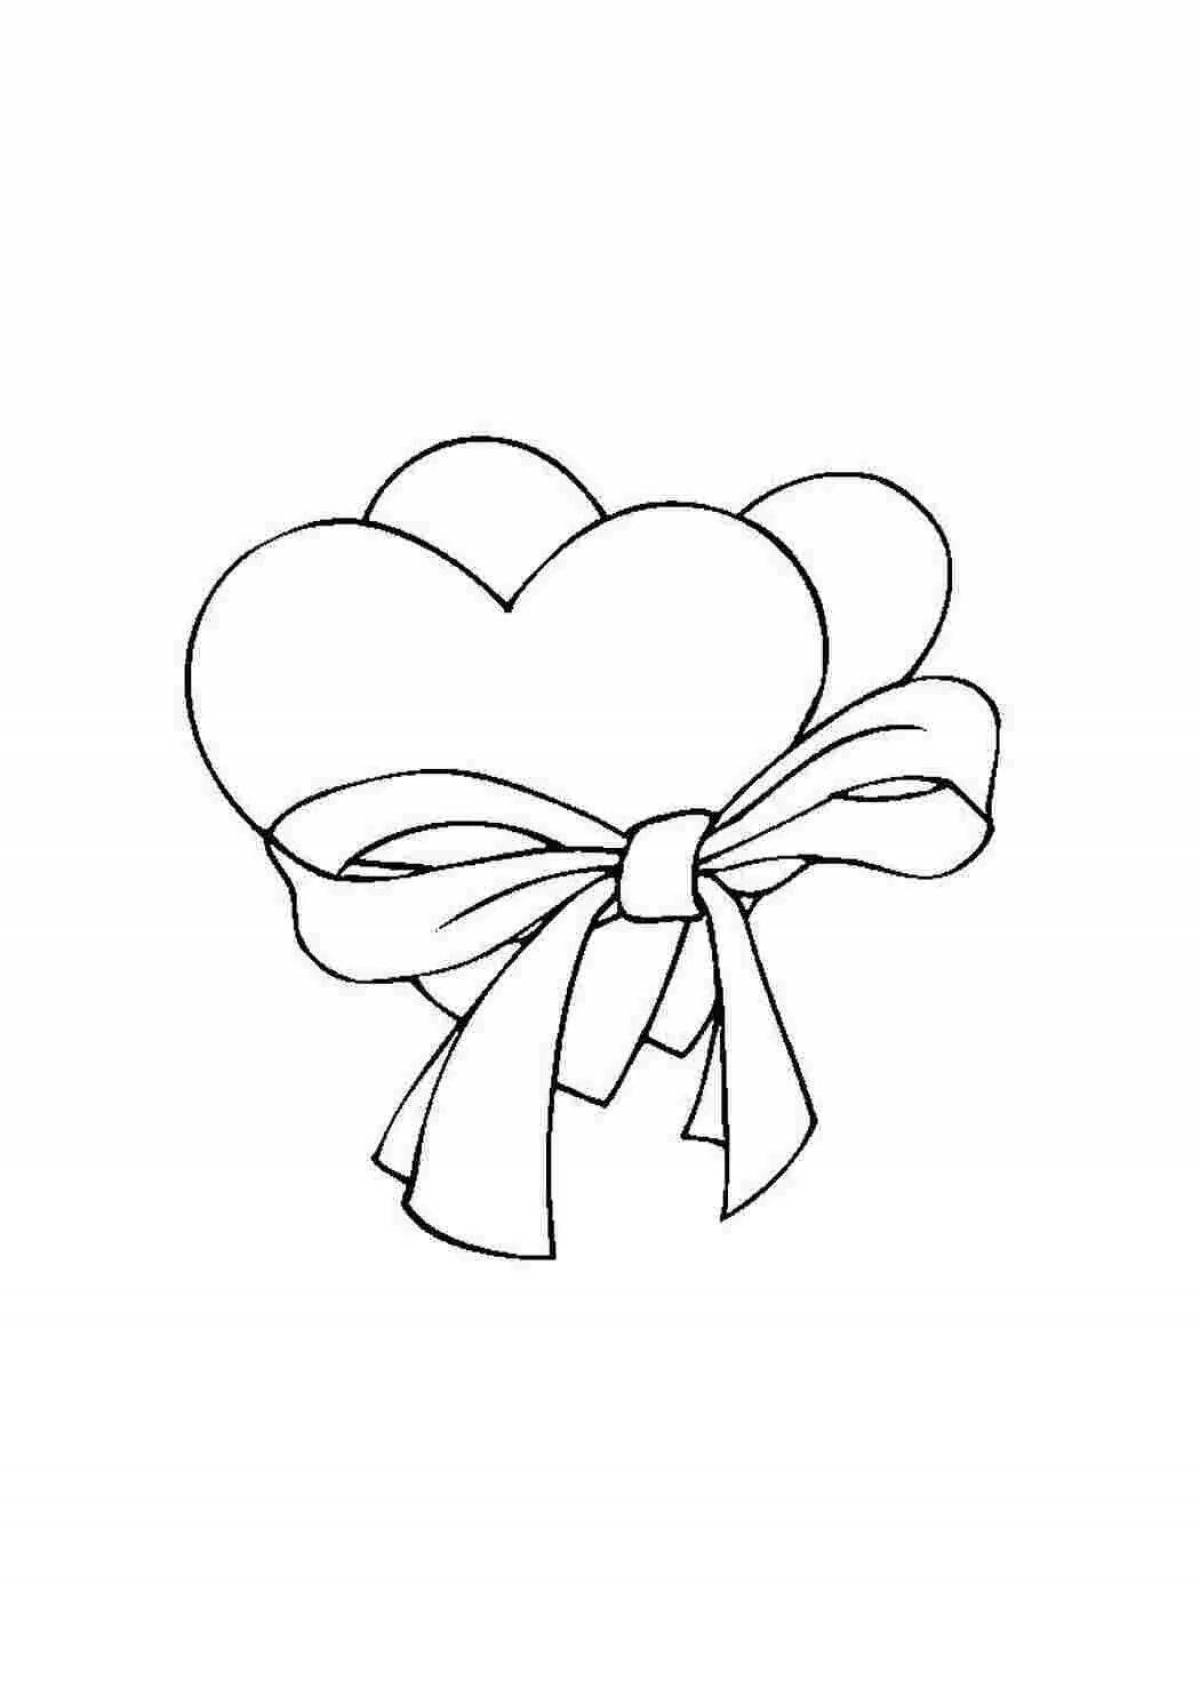 Coloring book bright bow for preschoolers